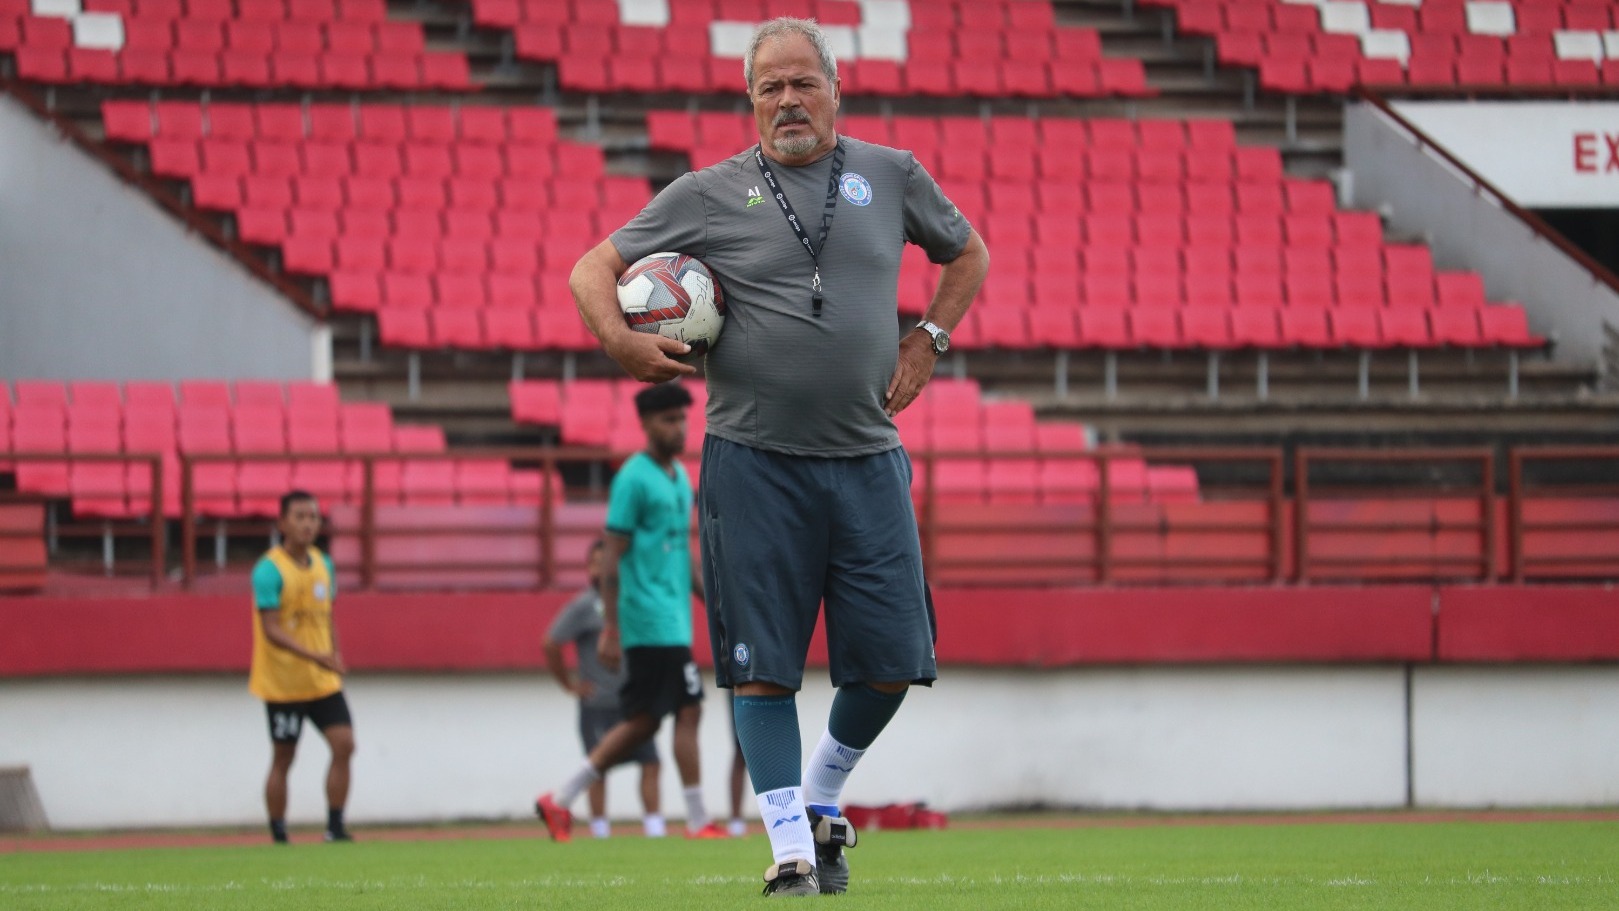 ISL 2019-20 | Very happy with players and the way they’re improving, says Antonio Iriondo